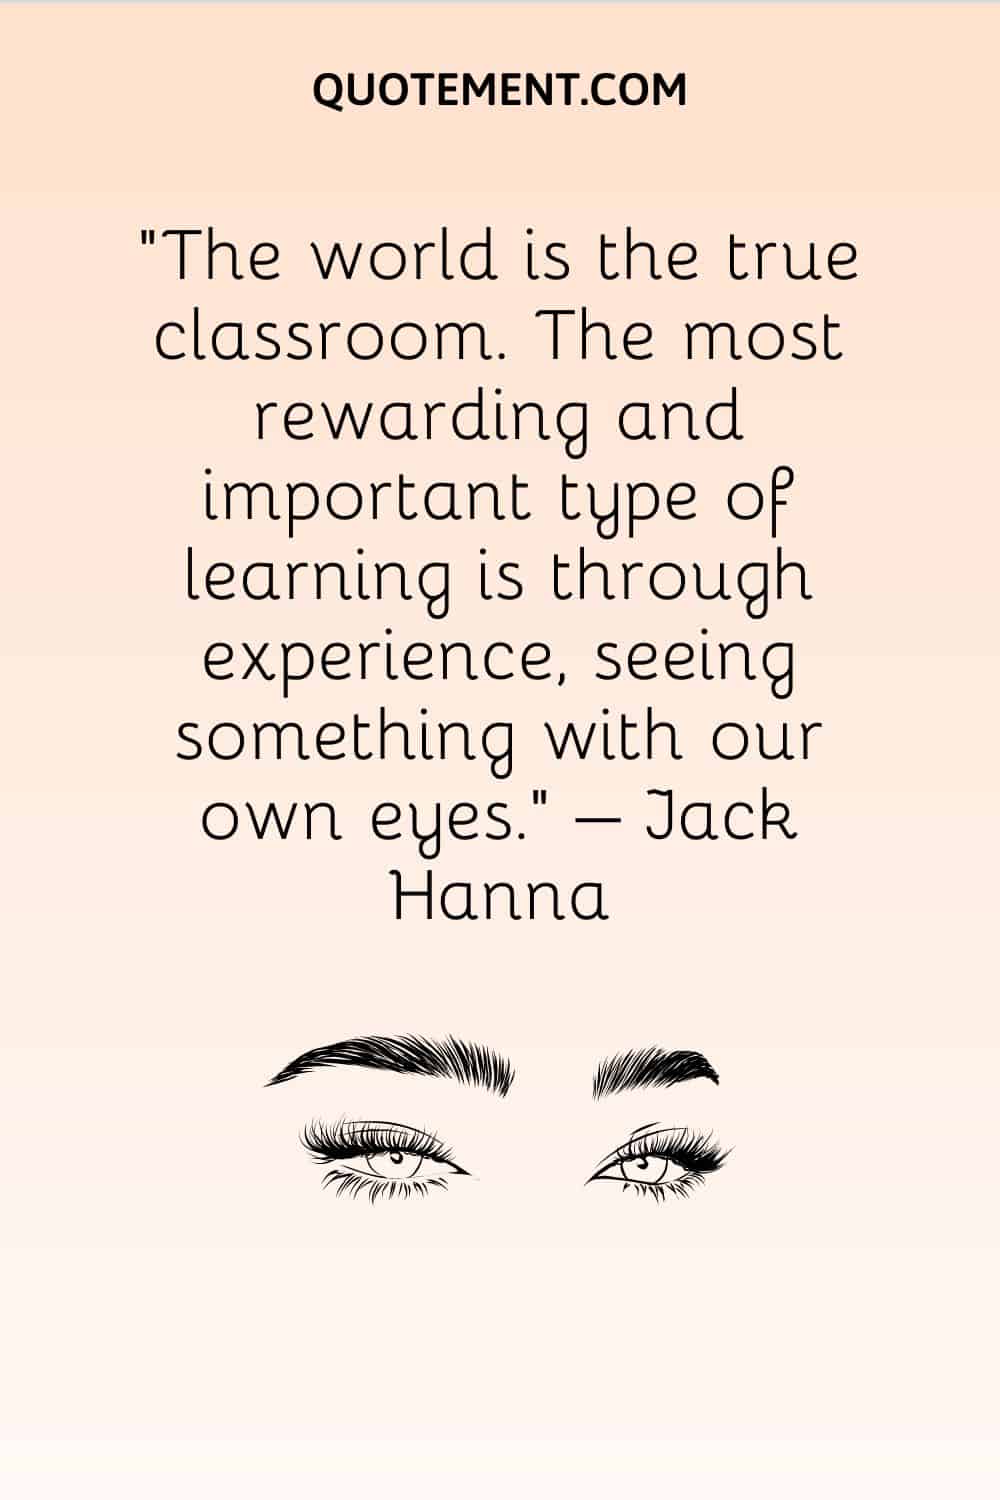 The world is the true classroom. The most rewarding and important type of learning is through experience, seeing something with our own eyes